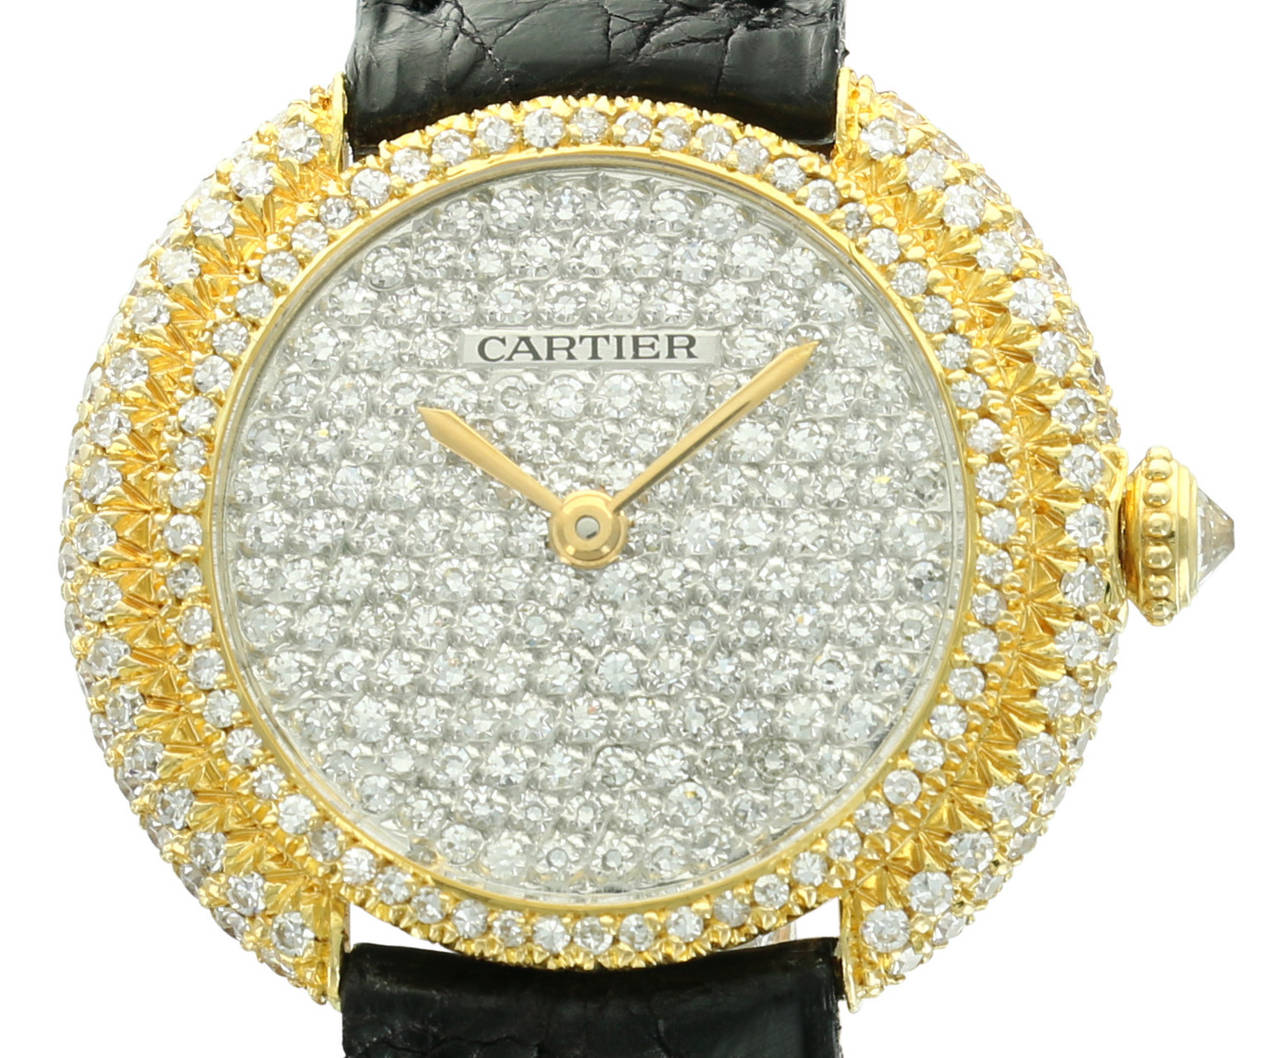 This beautiful, diamond dial Cartier lady's watch is as much a wonderful piece of jewelry as it is an elegant, petite wristwatch. At only 29mm in diameter, this watch wears perfectly on a lady's wrist while also shining bright with a factory diamond